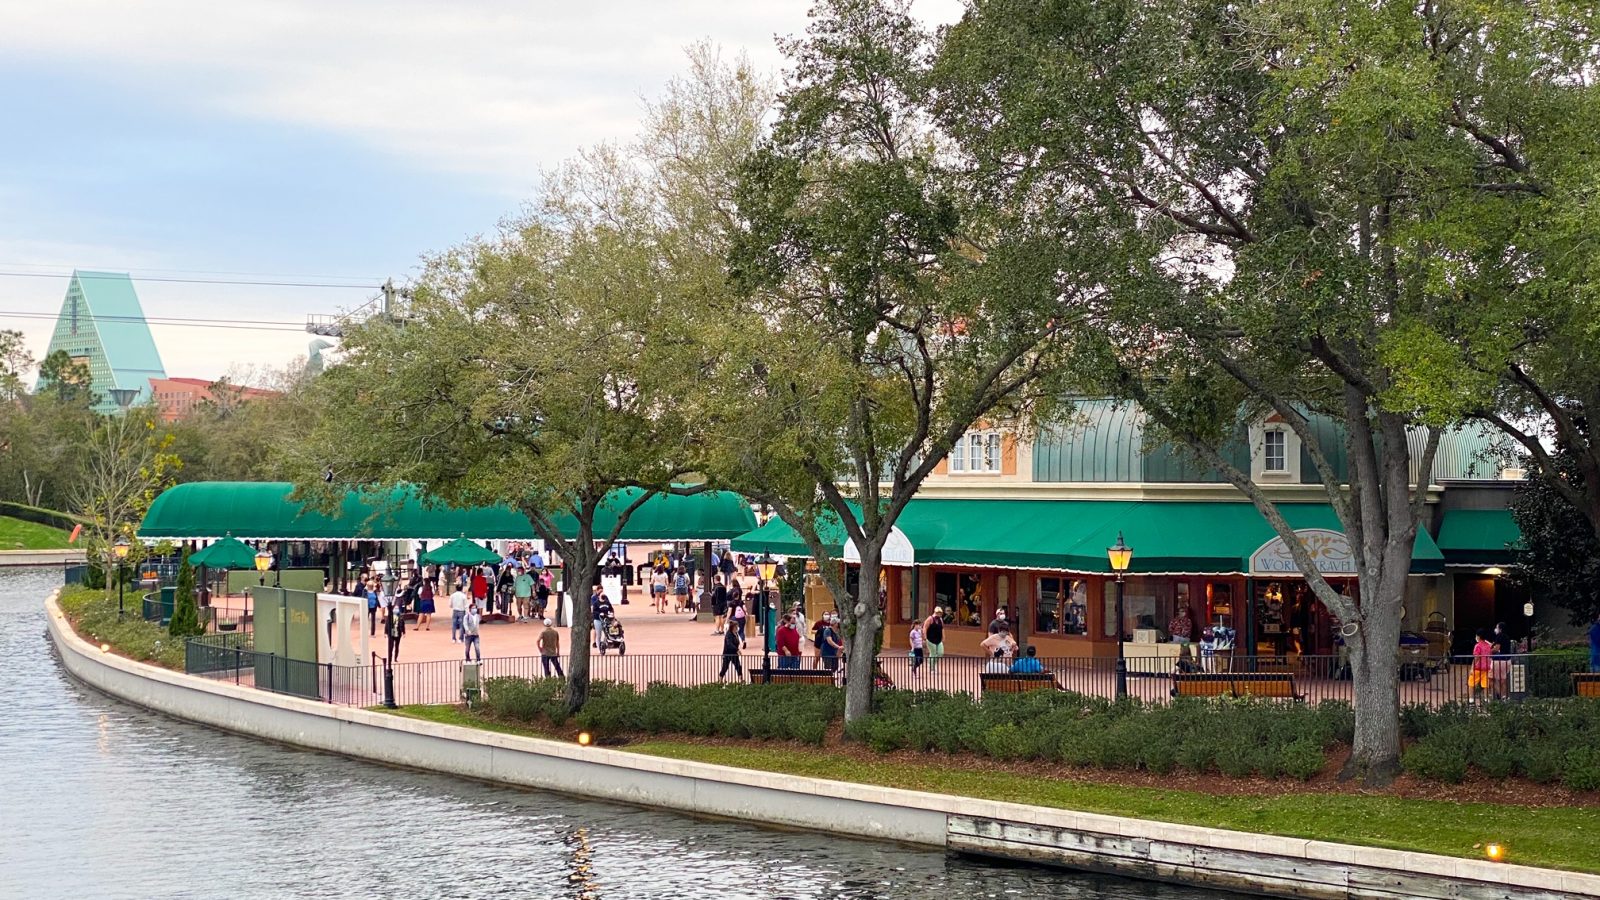 A look at the Epcot International Gateway from afar